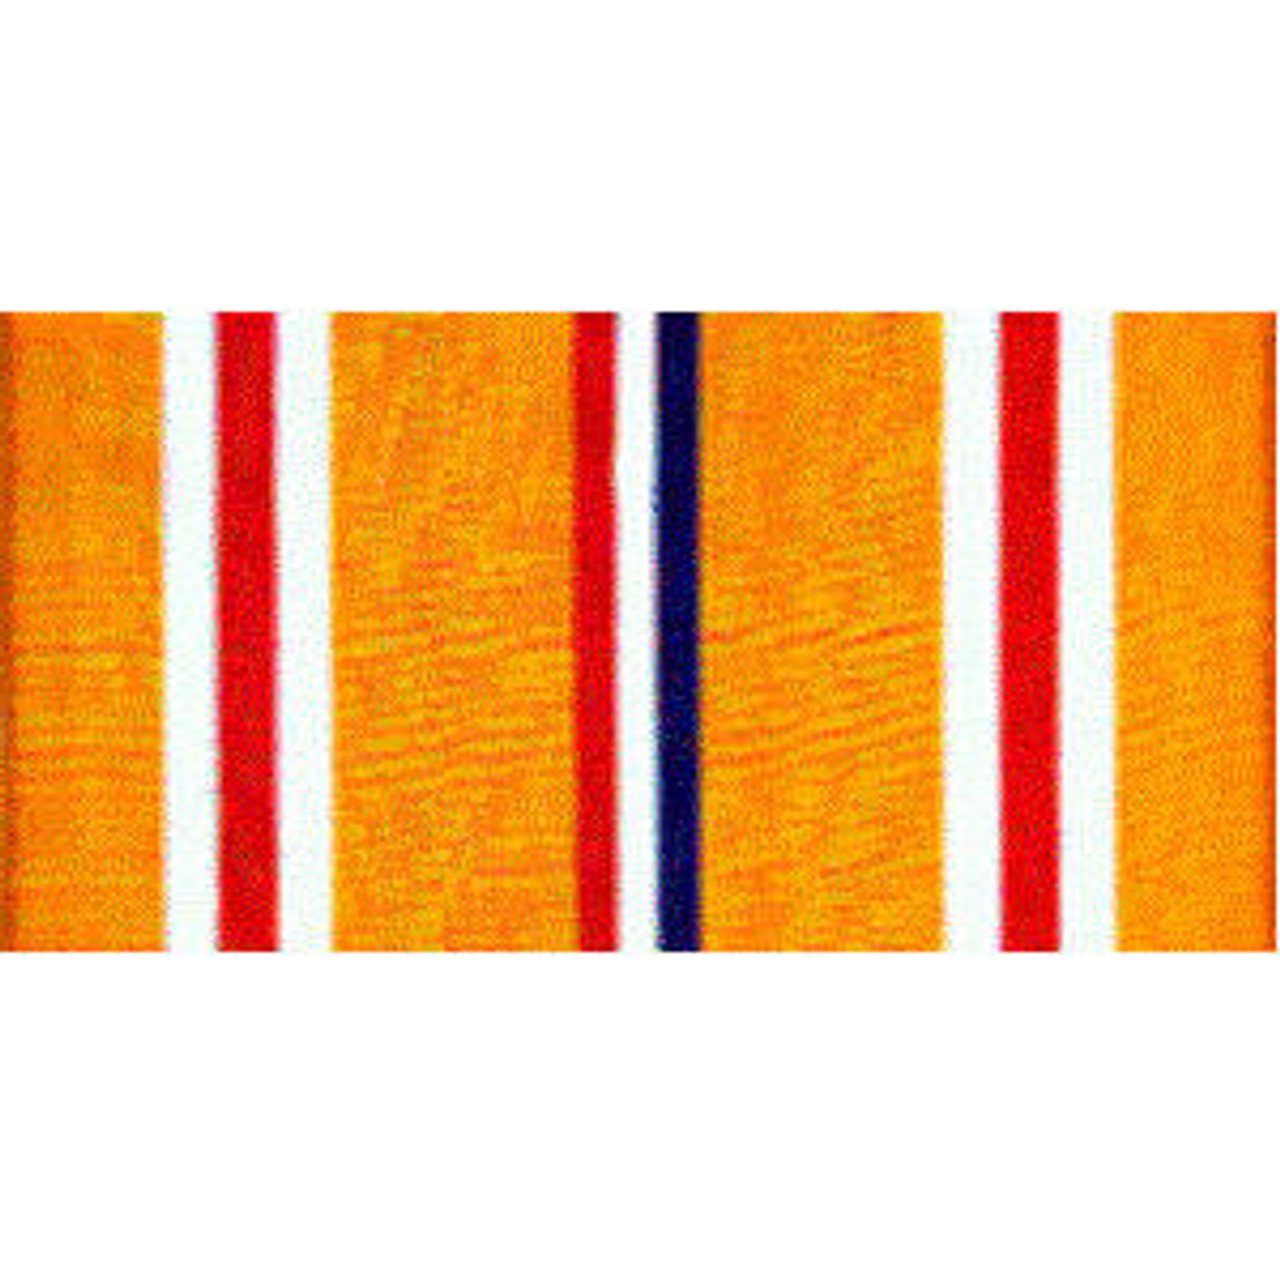 Asiatic Pacific Campaign Streamer. Orange, white, and red stripes with blue stripe at center.